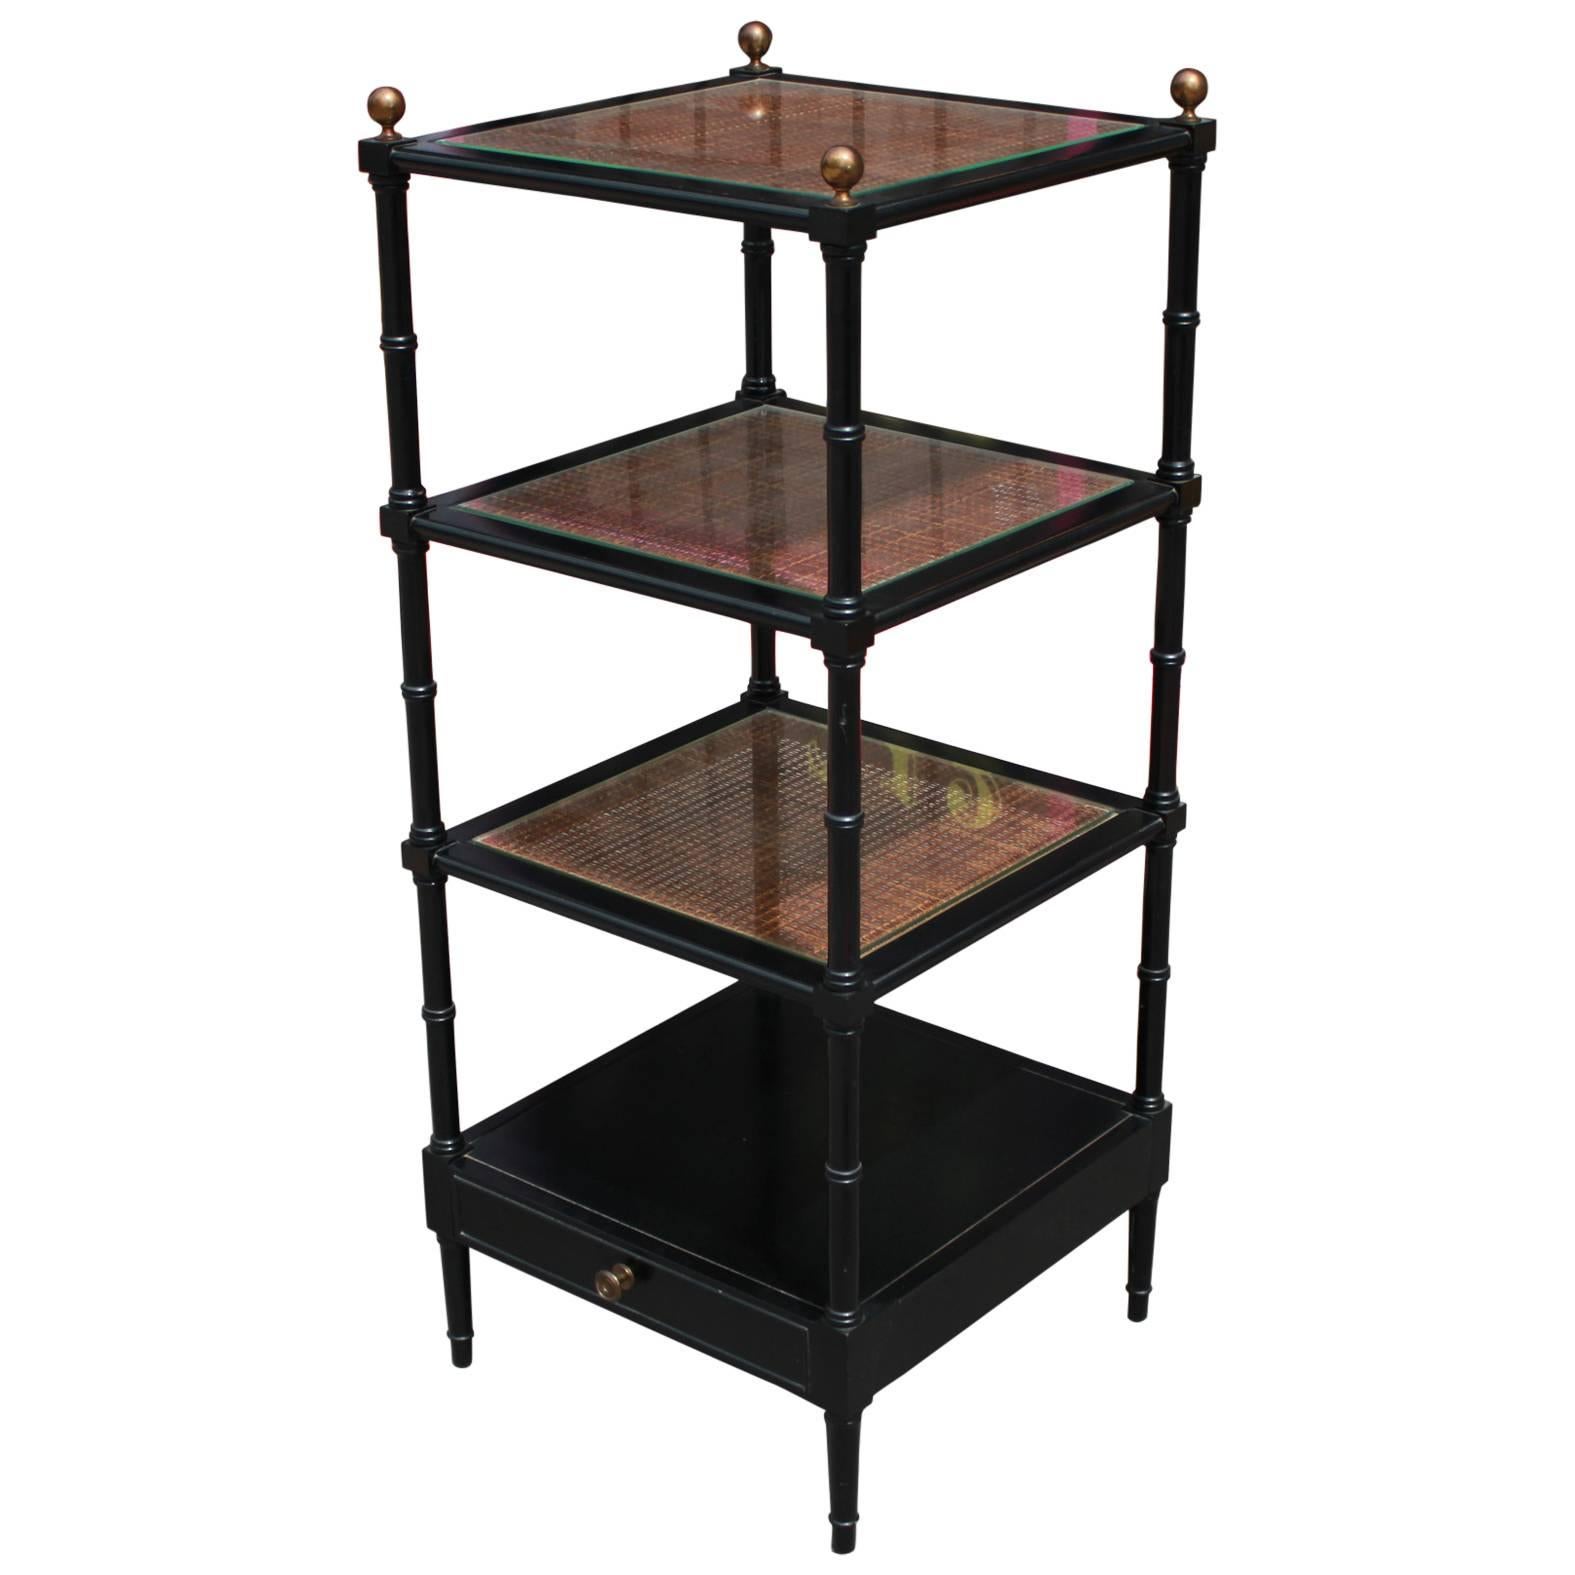 Square Black Lacquer and Rattan Faux Bamboo Modern Etagere Bookshelf